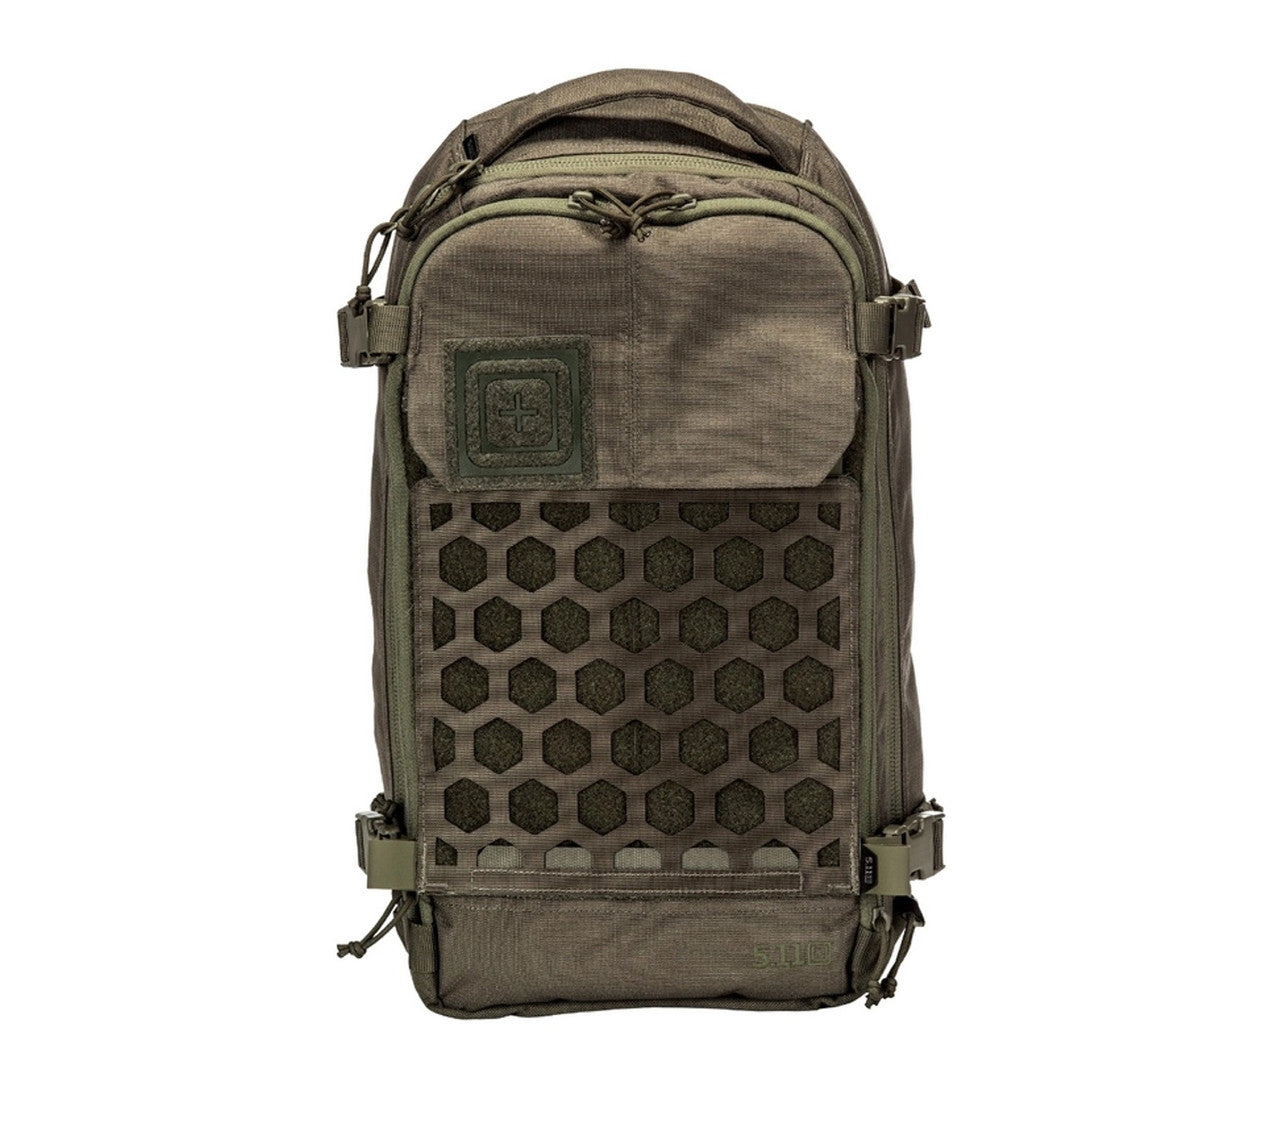 5.11 Tactical Rush 12 2.0 review: one mighty little EDC backpack